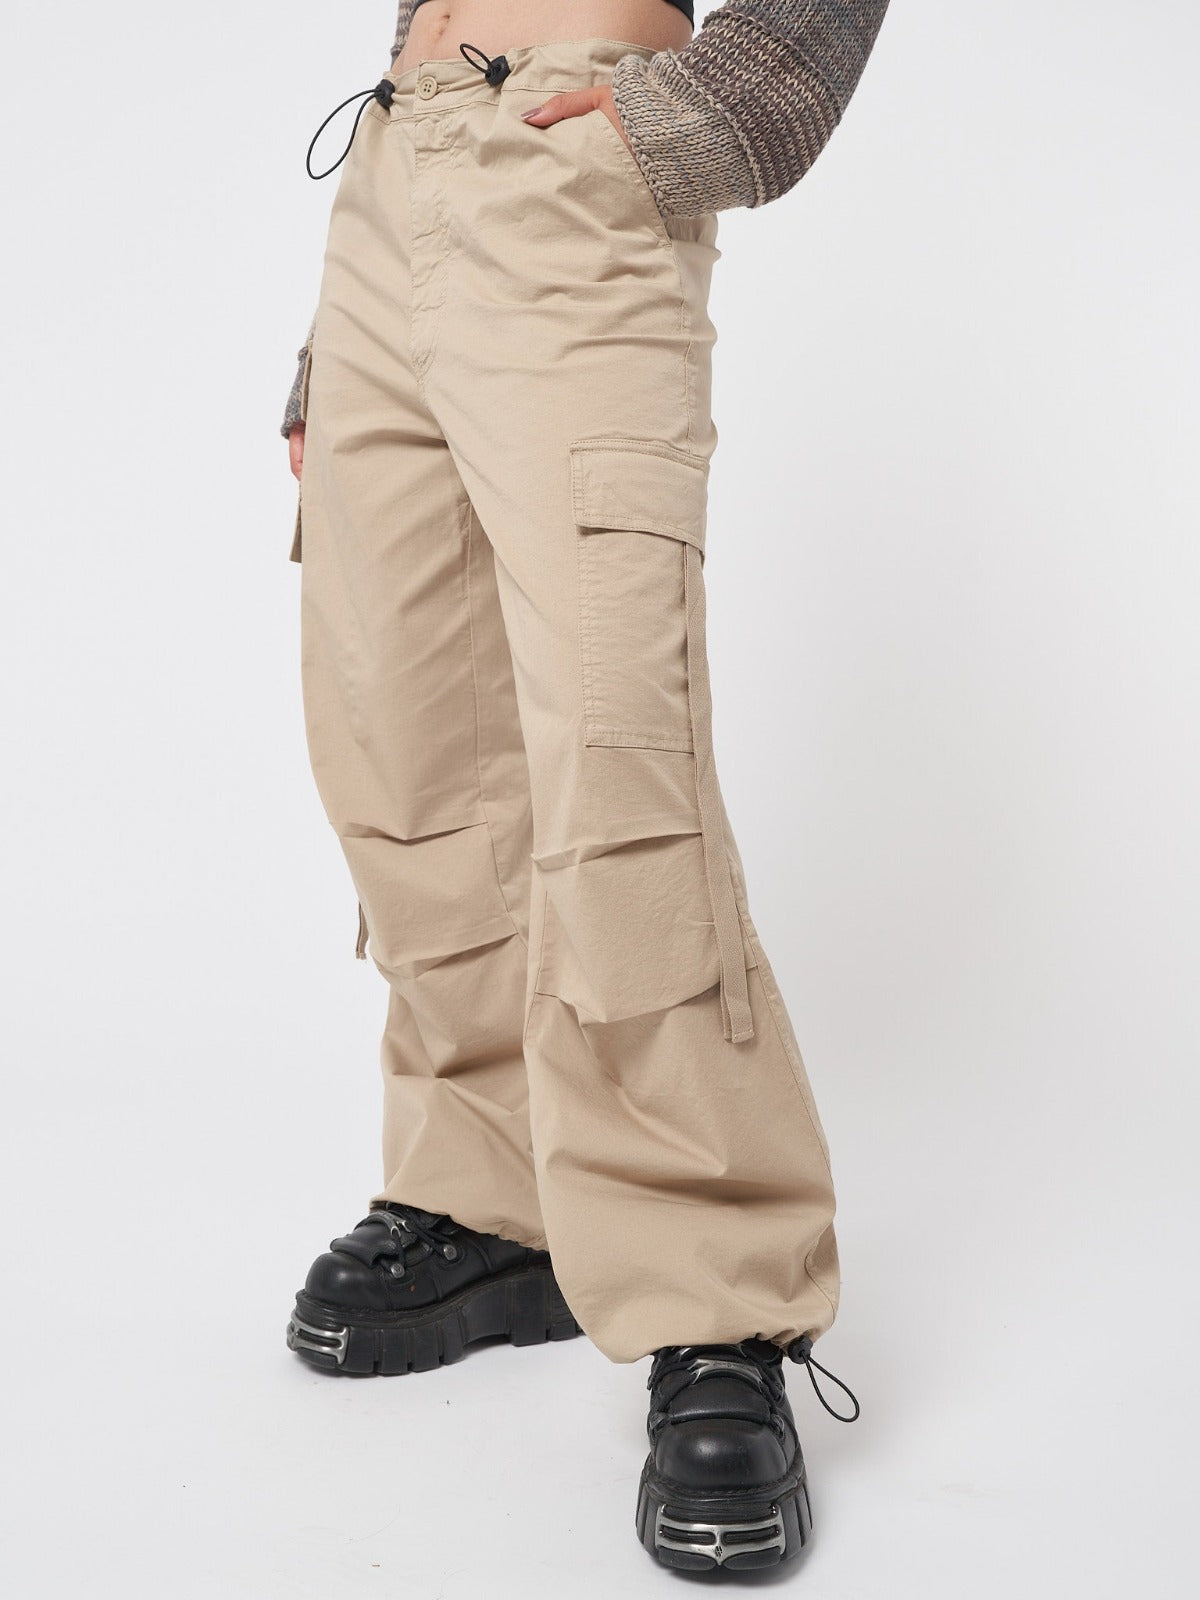 Beige tech cargo pants in parachute style with side utility pockets 